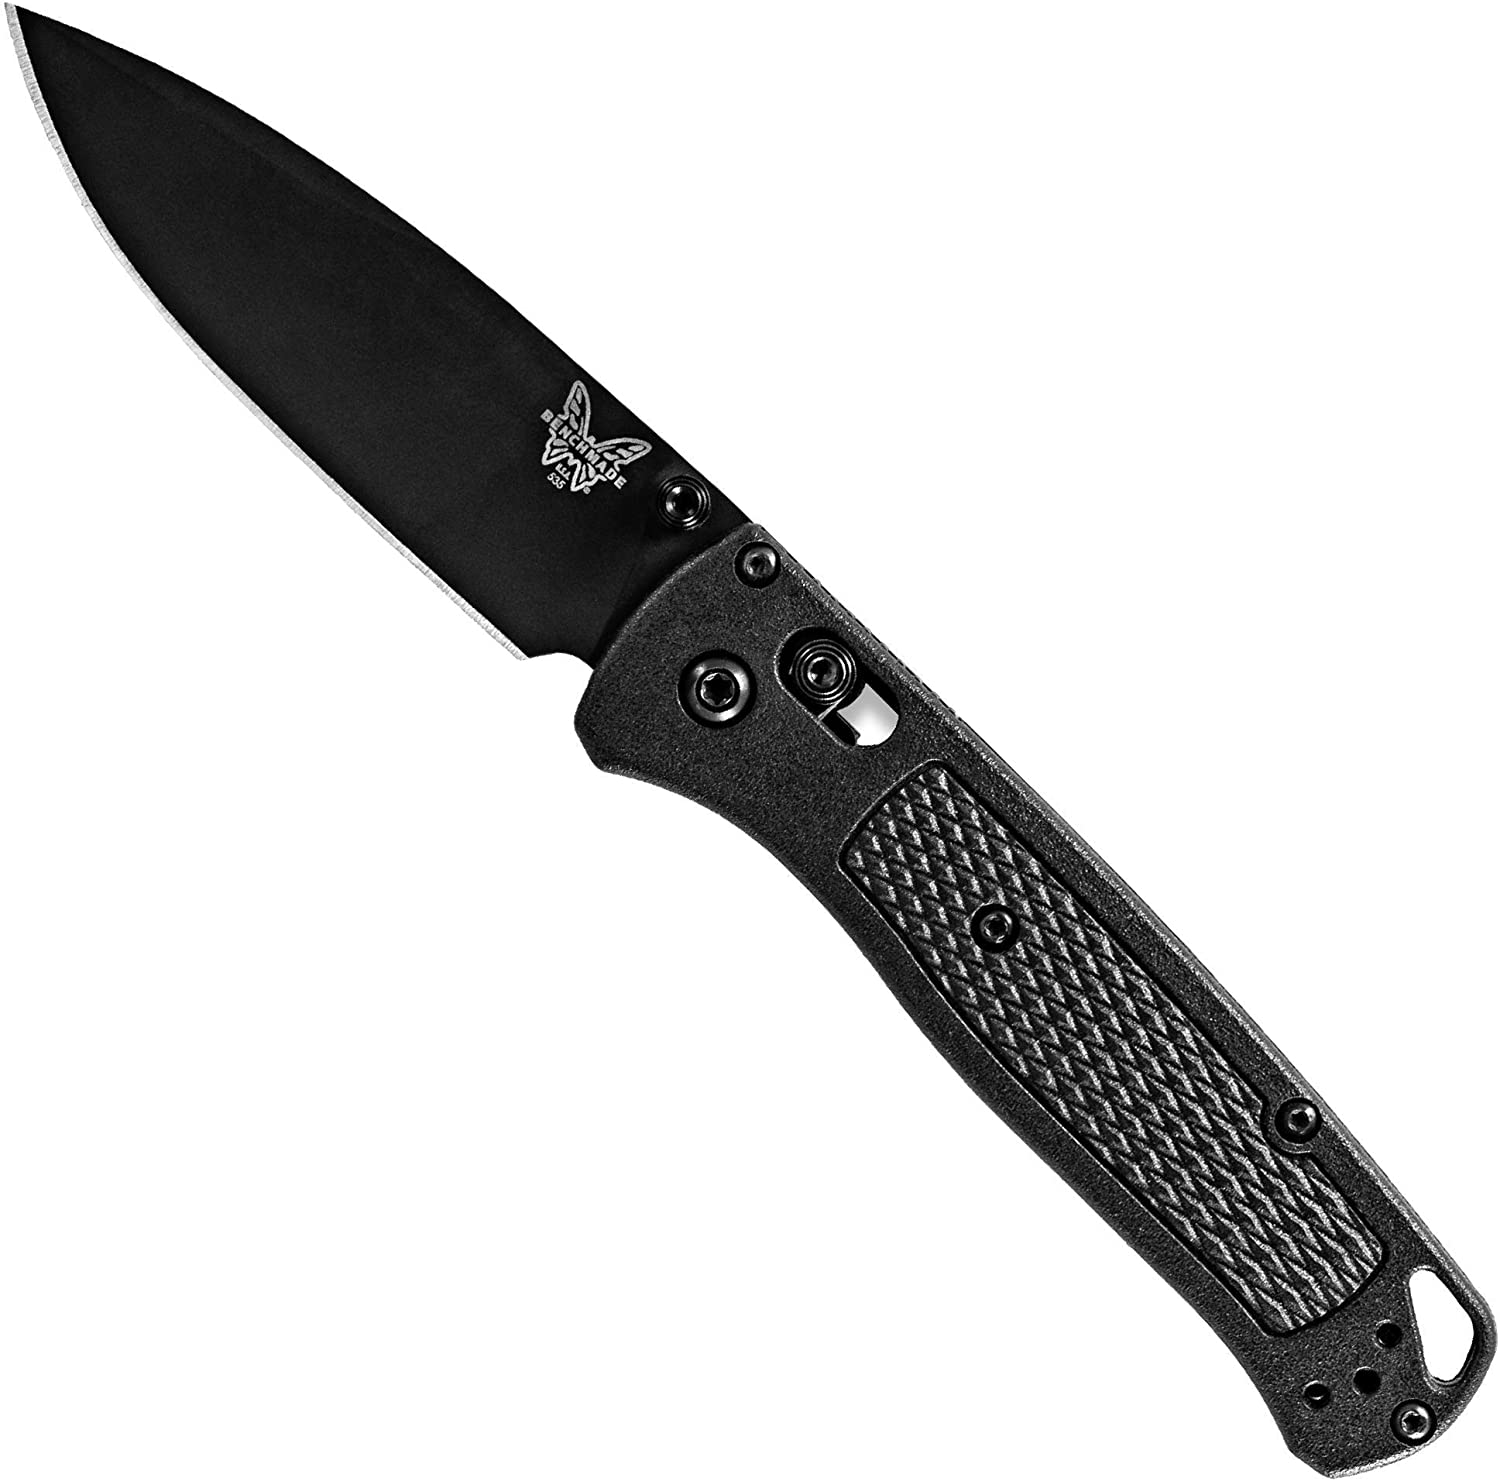 Benchmade – Bugout 535BK-2 EDC Manual Open Folding Knife, Drop-Point Blade, Plain Edge, Coated Finish, Black CF-Elite Handle, Made in the USA